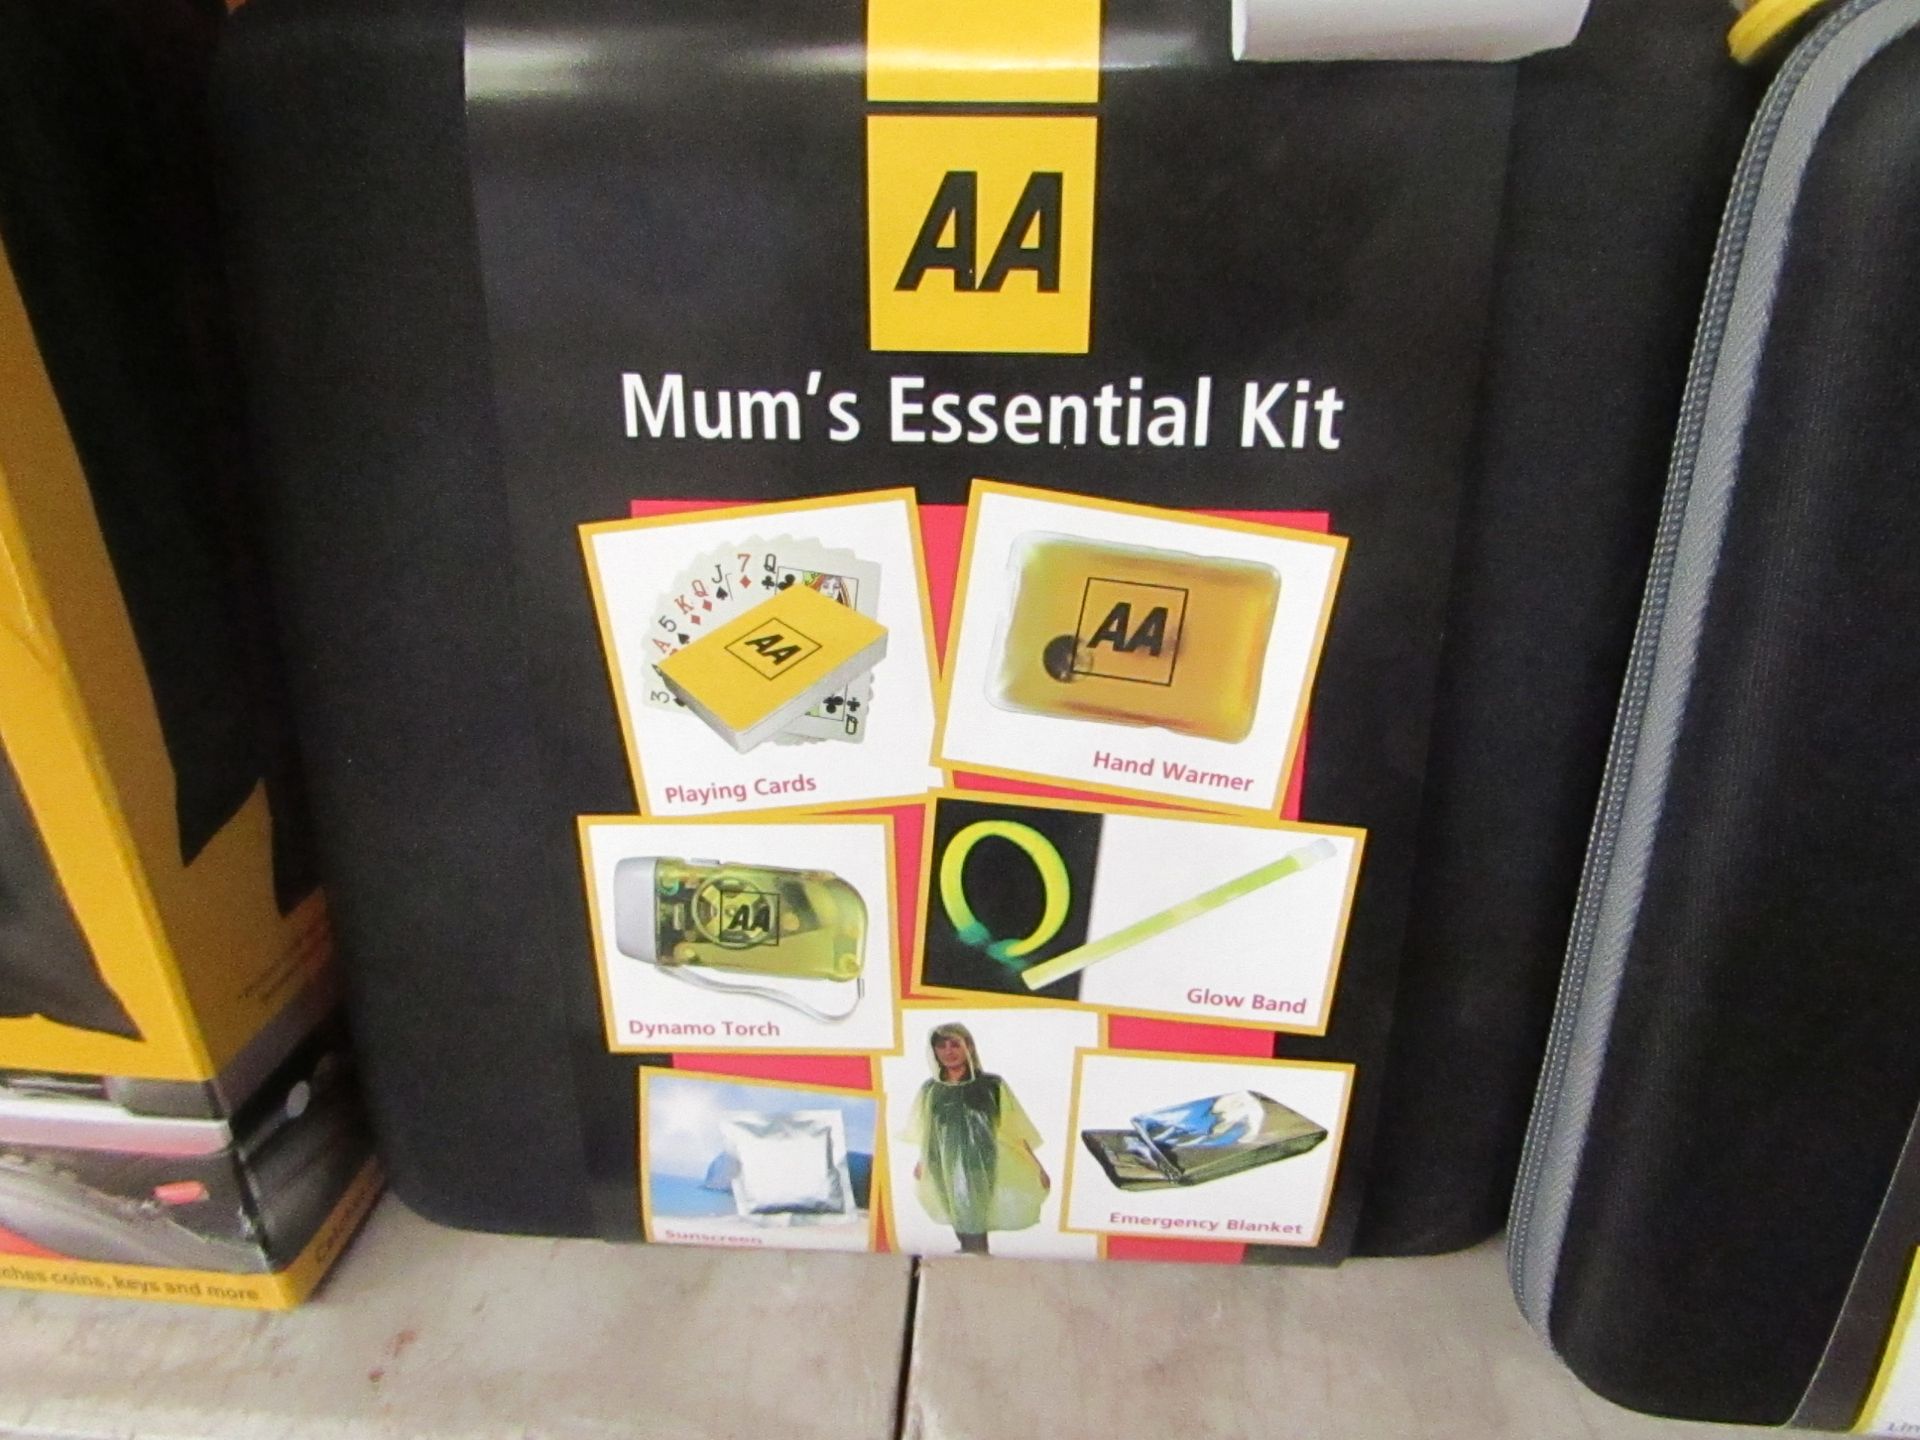 AA mums essential kit, new and packaged.